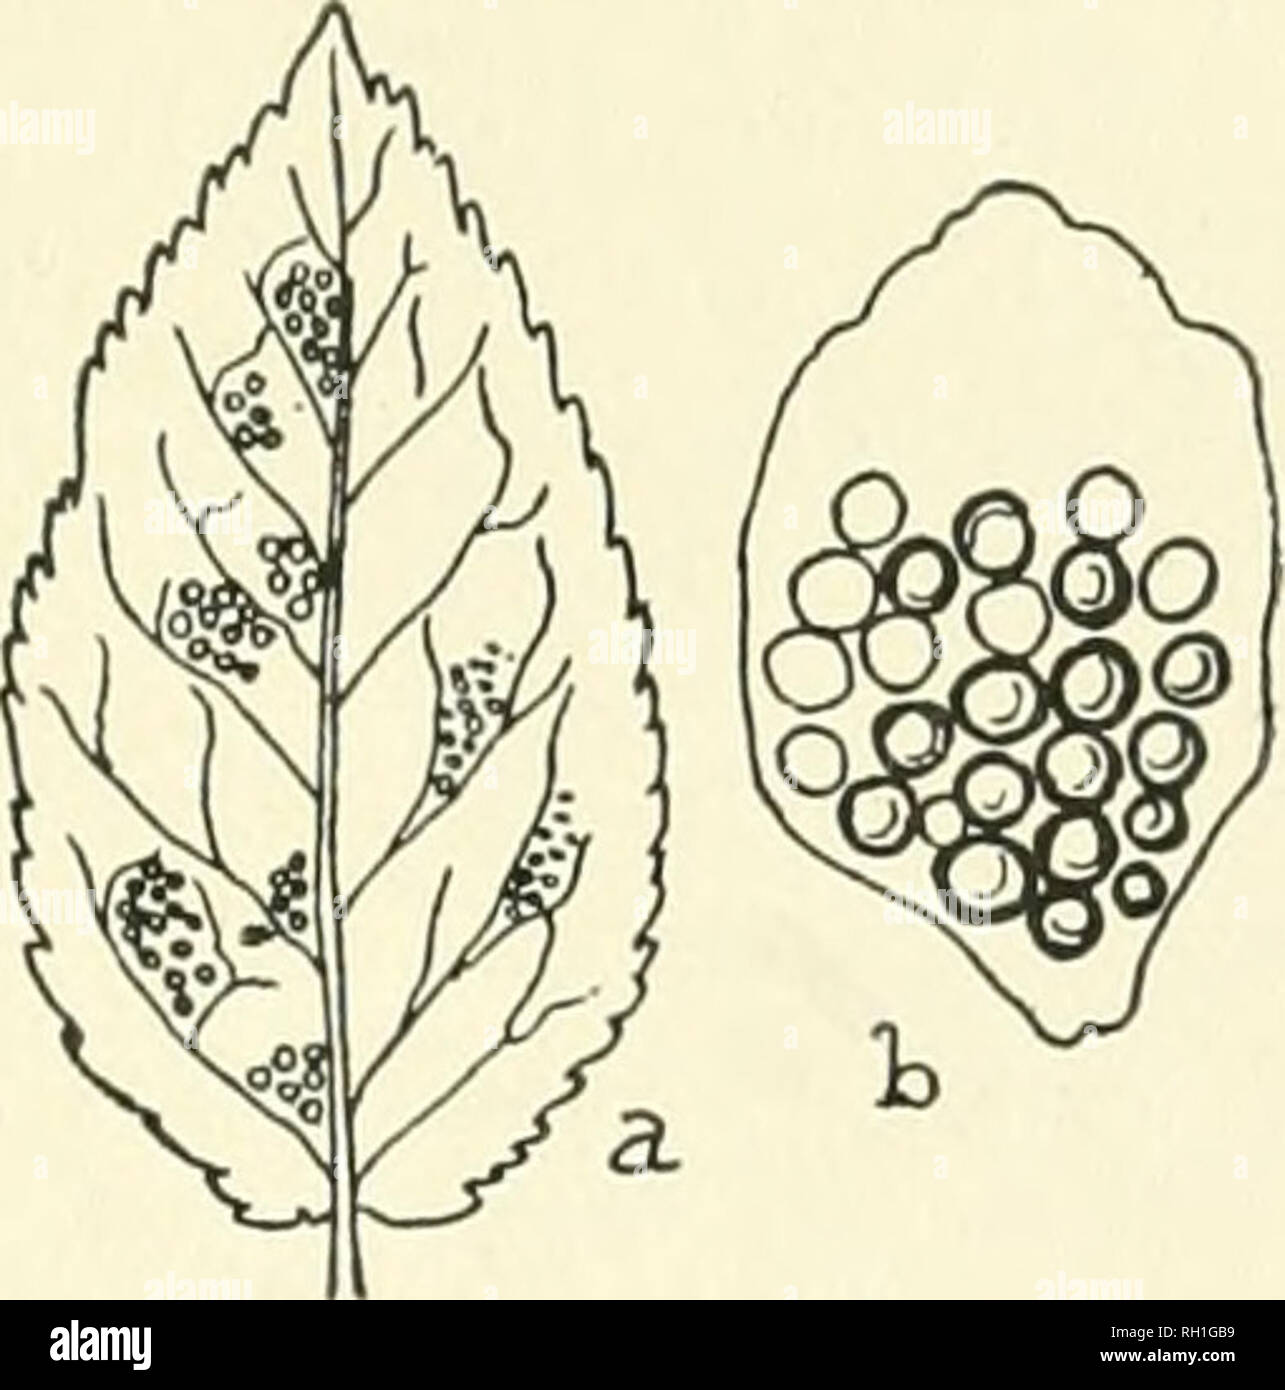 . The British rust fungi (Uredinales) their biology and classification. Rust fungi -- Great Britain. THECOPSORA 369 Credo Padi K. et S. exsicc. 187. Cooke, Handb. p. 527. U. porphyrogenit.i Kze. ; Cooke, Micr. Fung. p. 21(5. Melampsora Padi Cooke, Handb. p. 523 (1871). Plowr. Ured. p. 246. Fung. Fl. Yorkshire, p. 184. Pucciniastrum Padi Dietel in Eng. u. Prantl, NatUrl. Pflanz. i. 1**, p. 47. Fischer, Ured. Schwciz, p. 463, f. 303 ; Centralbl. f. Bakter. 2. xv. 227. Thecopsora areolata Magn. in Hedwigia, 1875, p. 123. Sacc. Syll. vii. 764. Spermogones. Whitish, pustular, flat, open, exhaling a Stock Photo